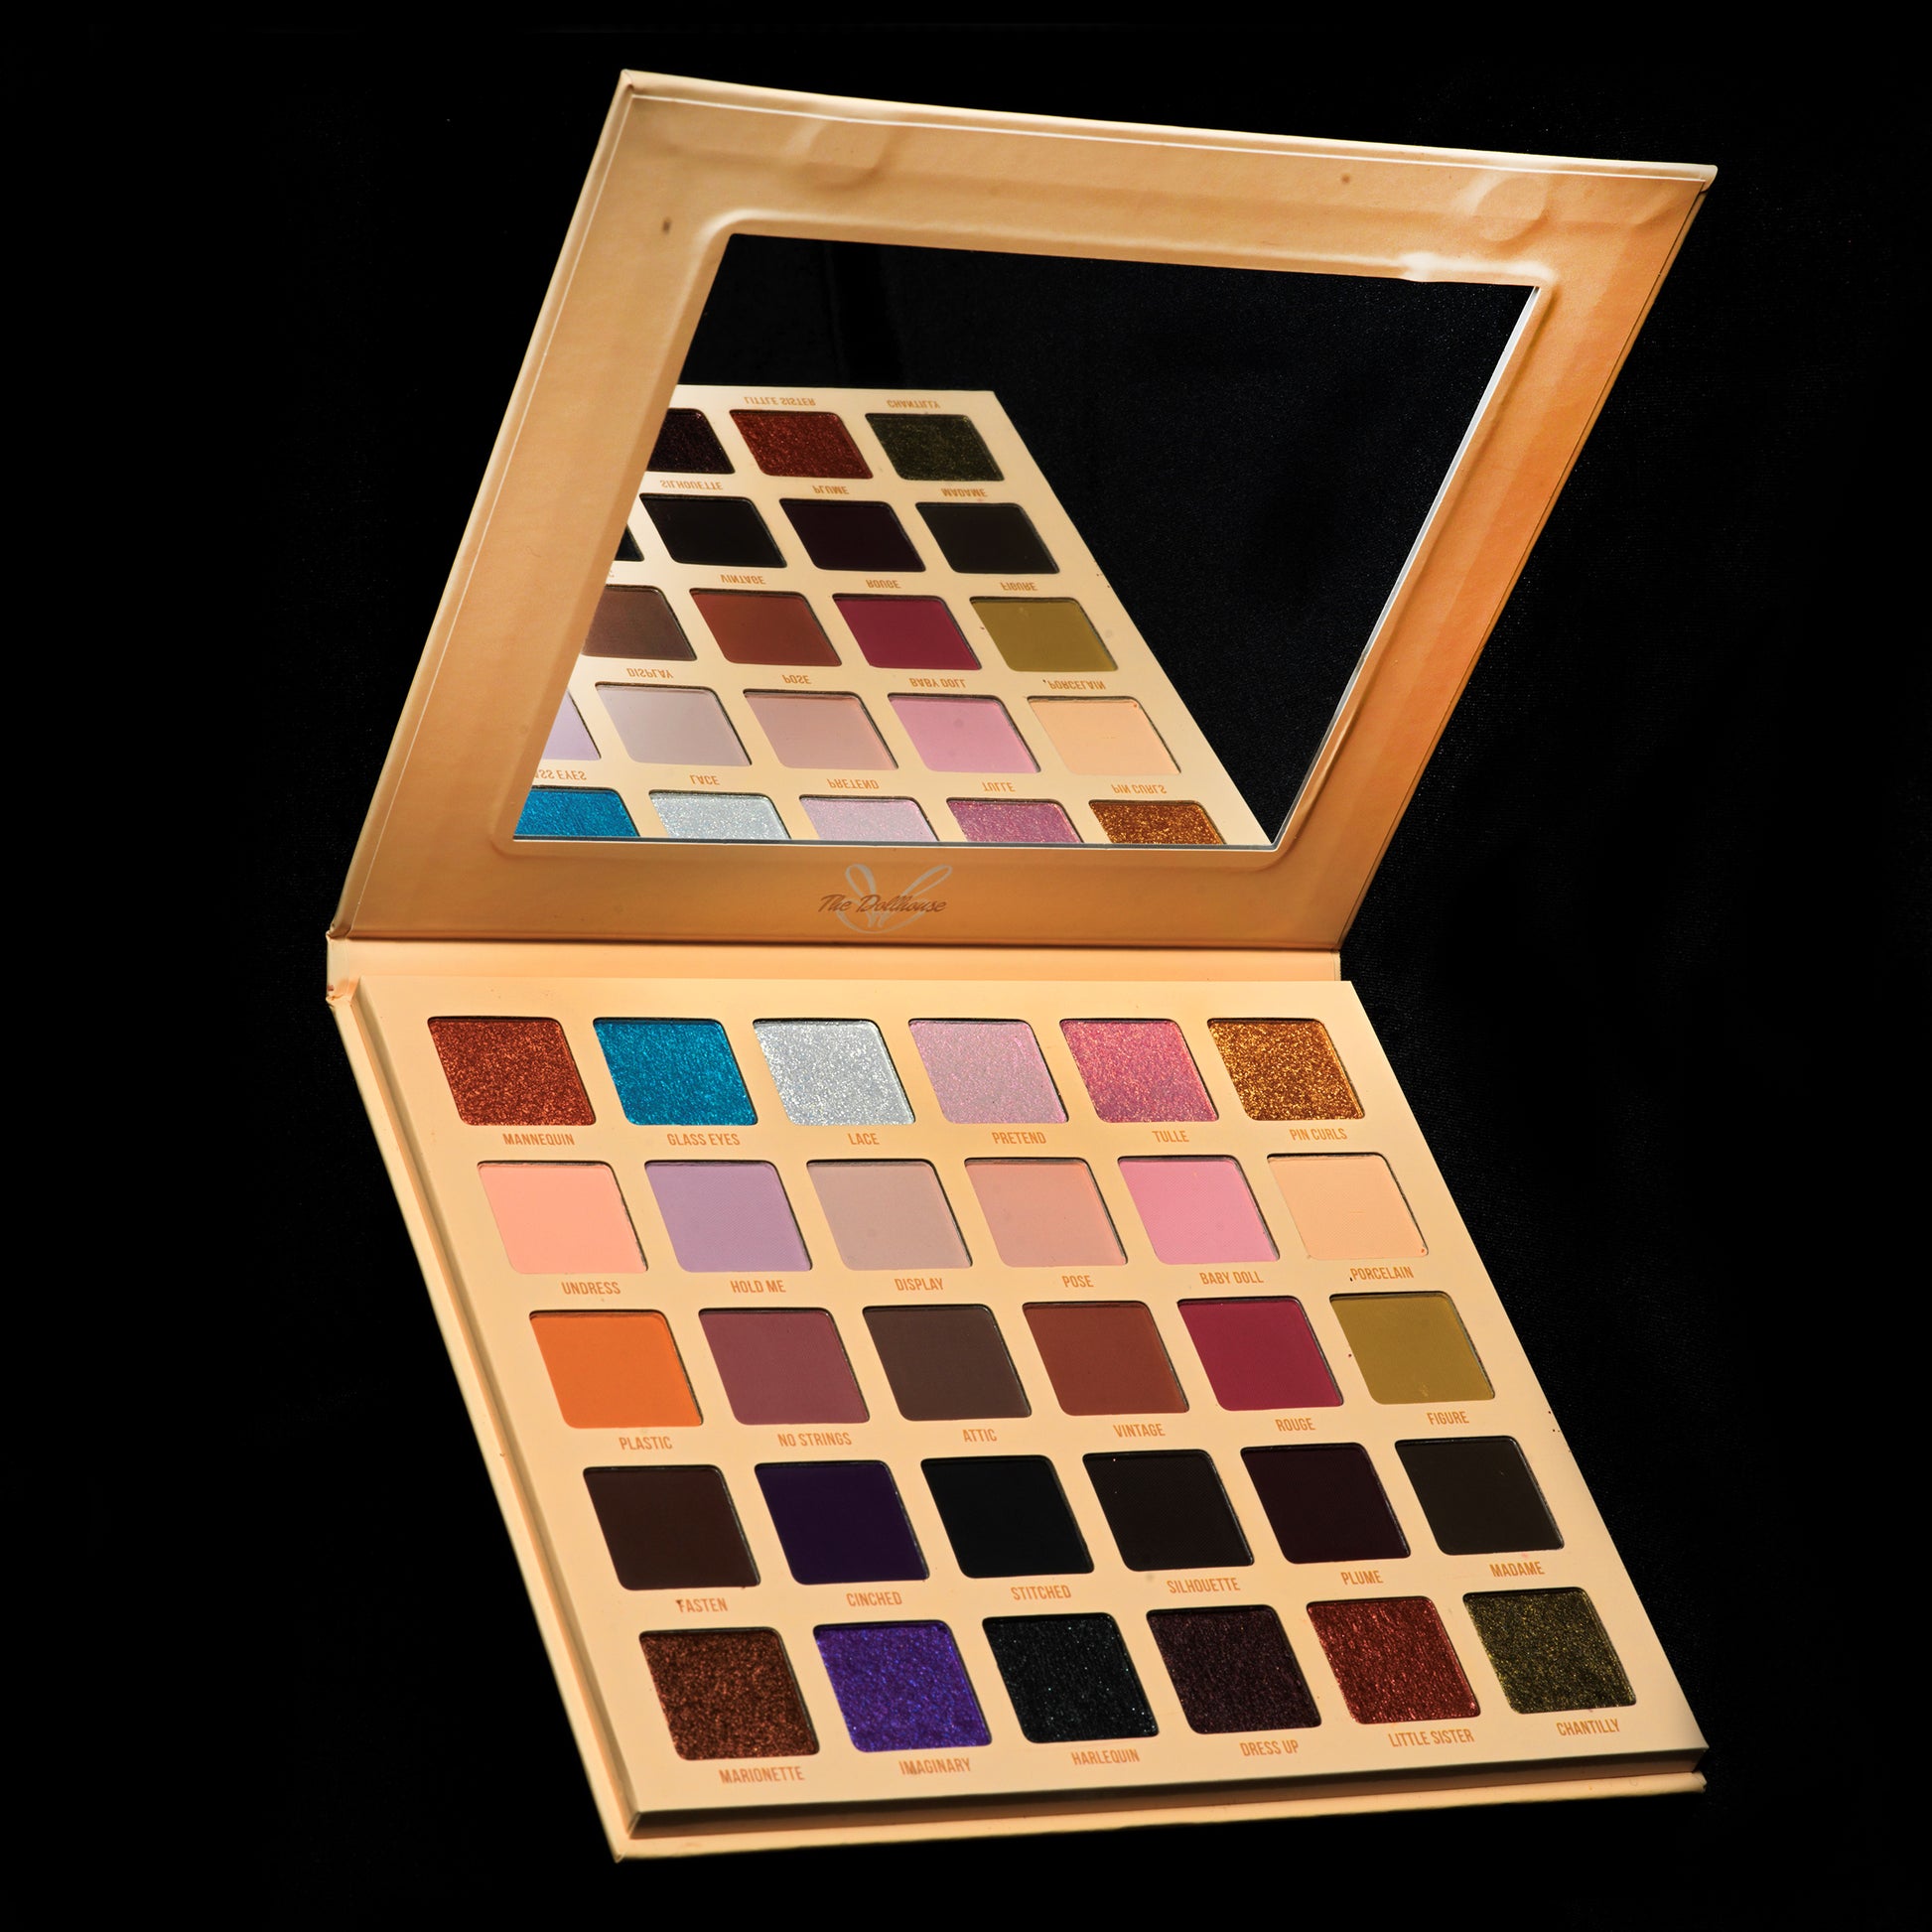 The Dollhouse palette opened by Blend Bunny cosmetics